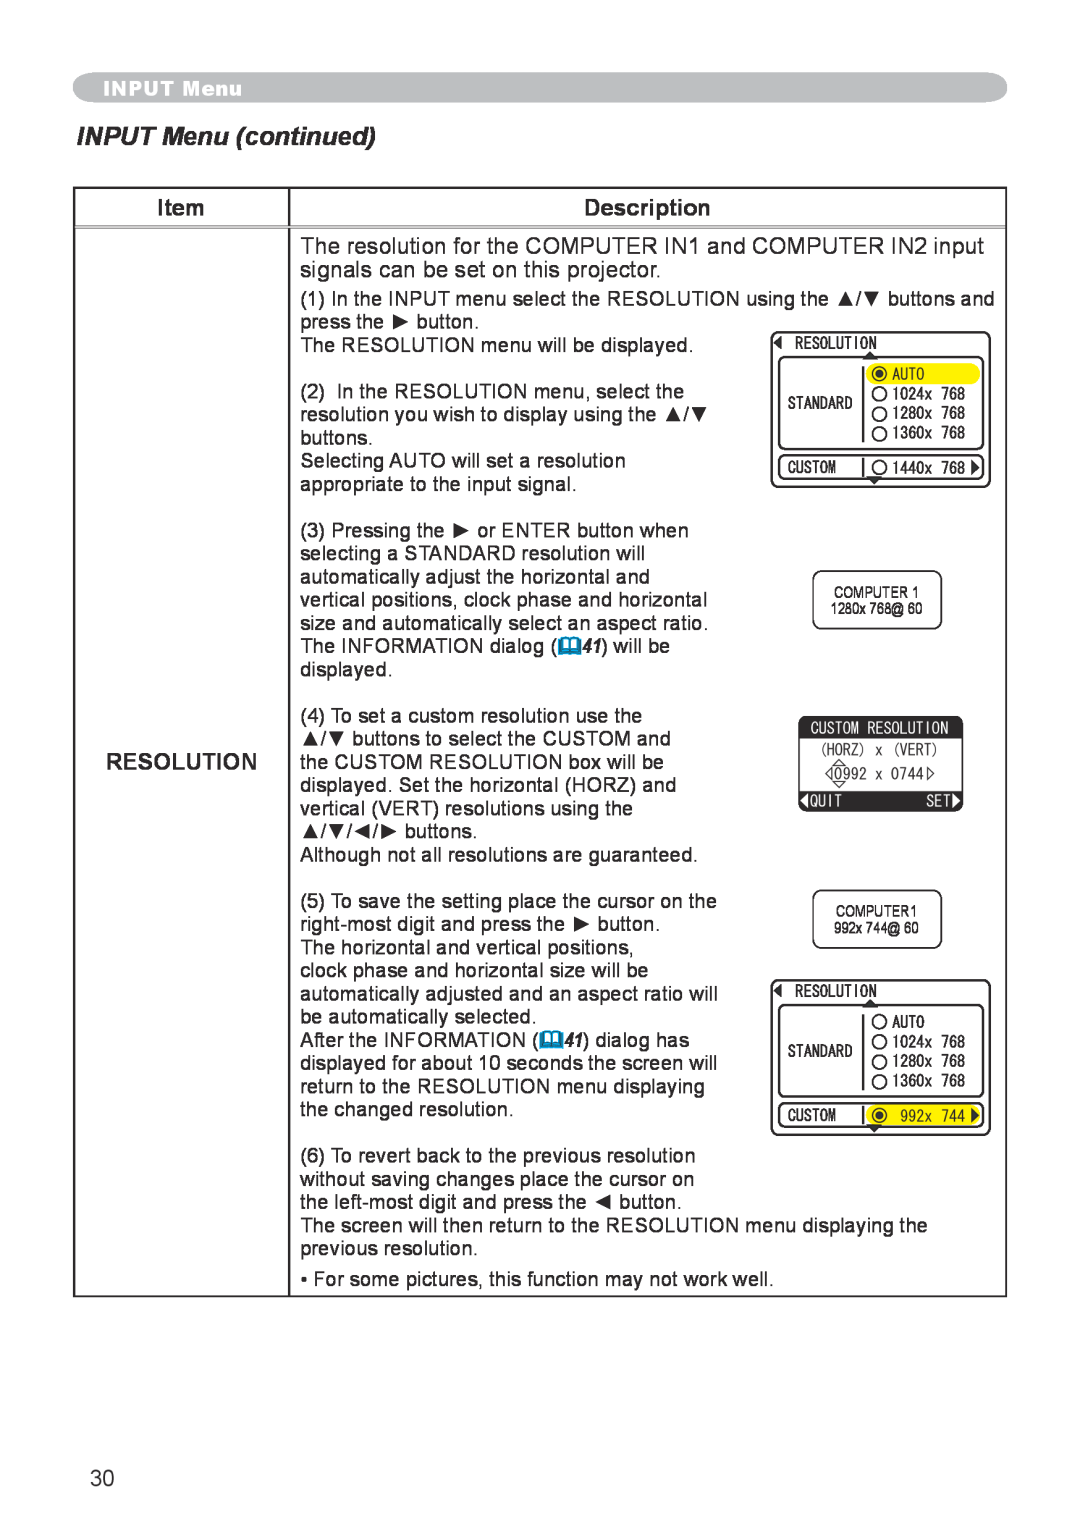 Apple CPX5, CPX1 user manual INPUT Menu continued, Description, Resolution, The RESOLUTION menu will be displayed 